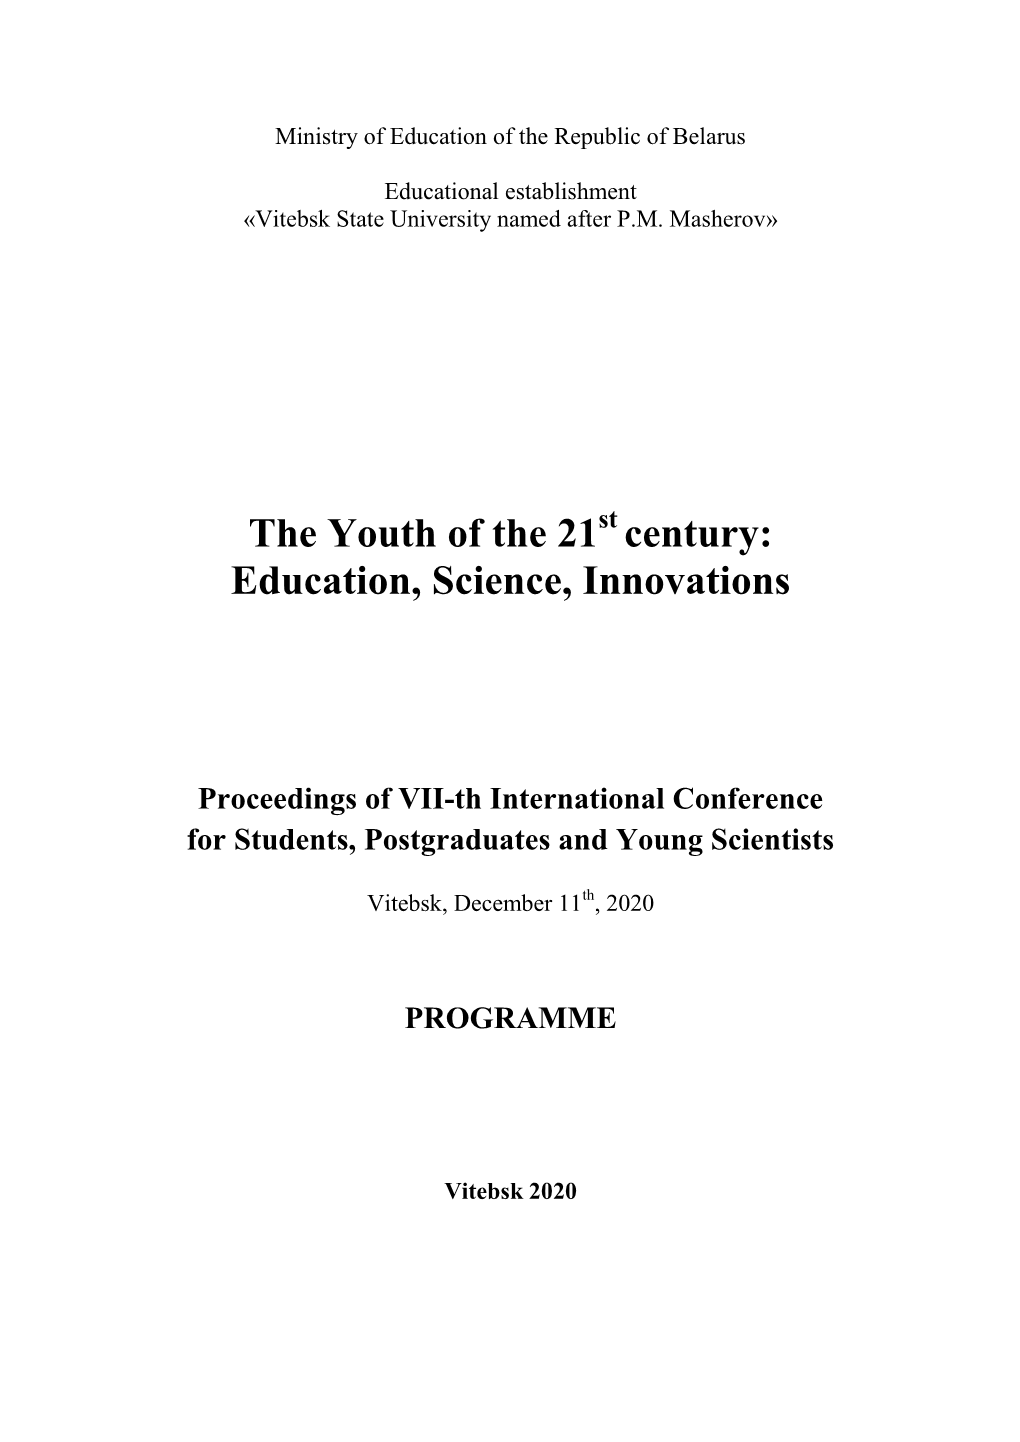 The Youth of the 21 Century: Education, Science, Innovations